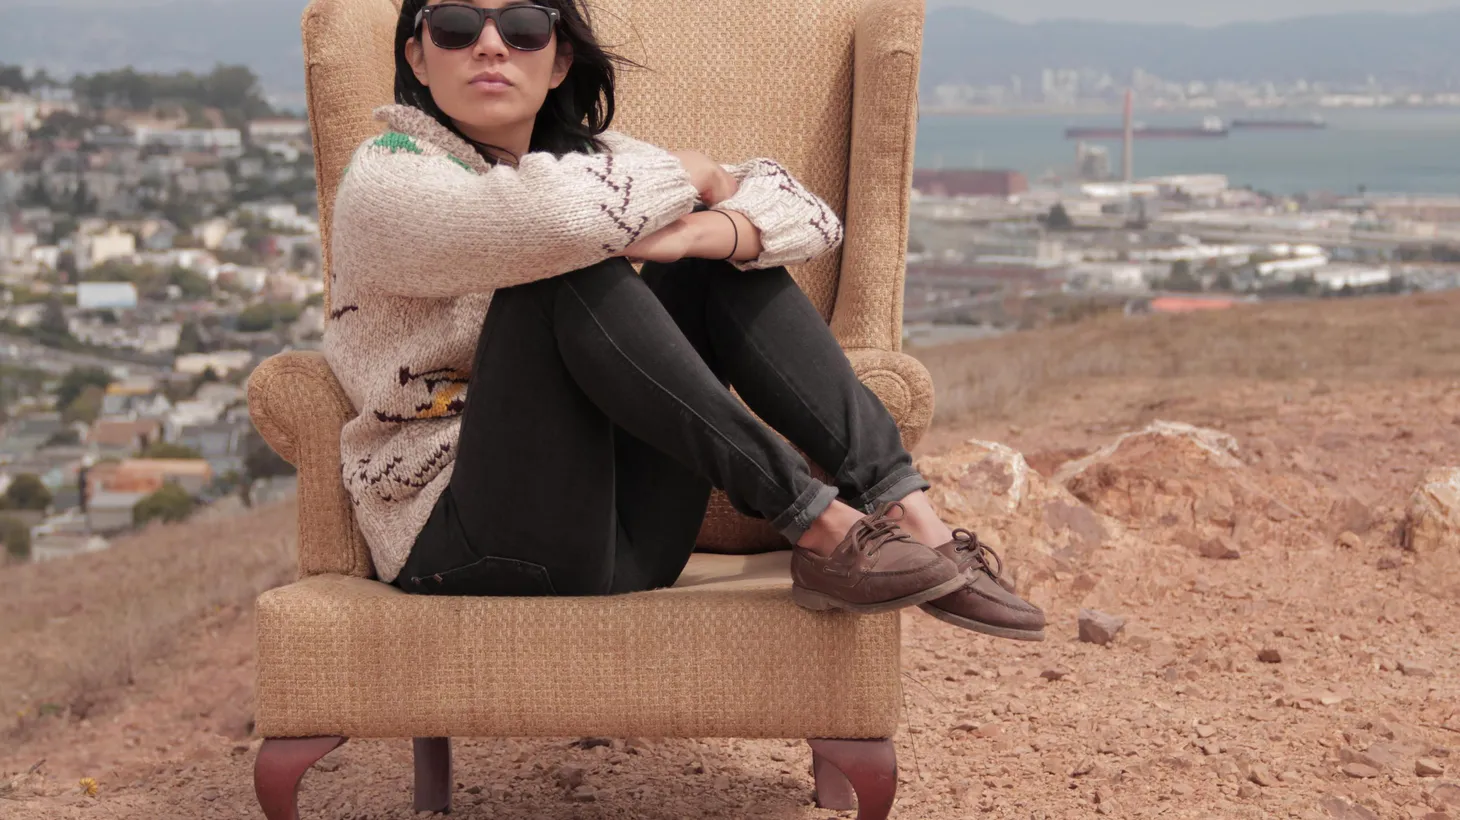 Thao & the Get Down Stay Down's music is bouncy yet sharp and always playful and quirky.